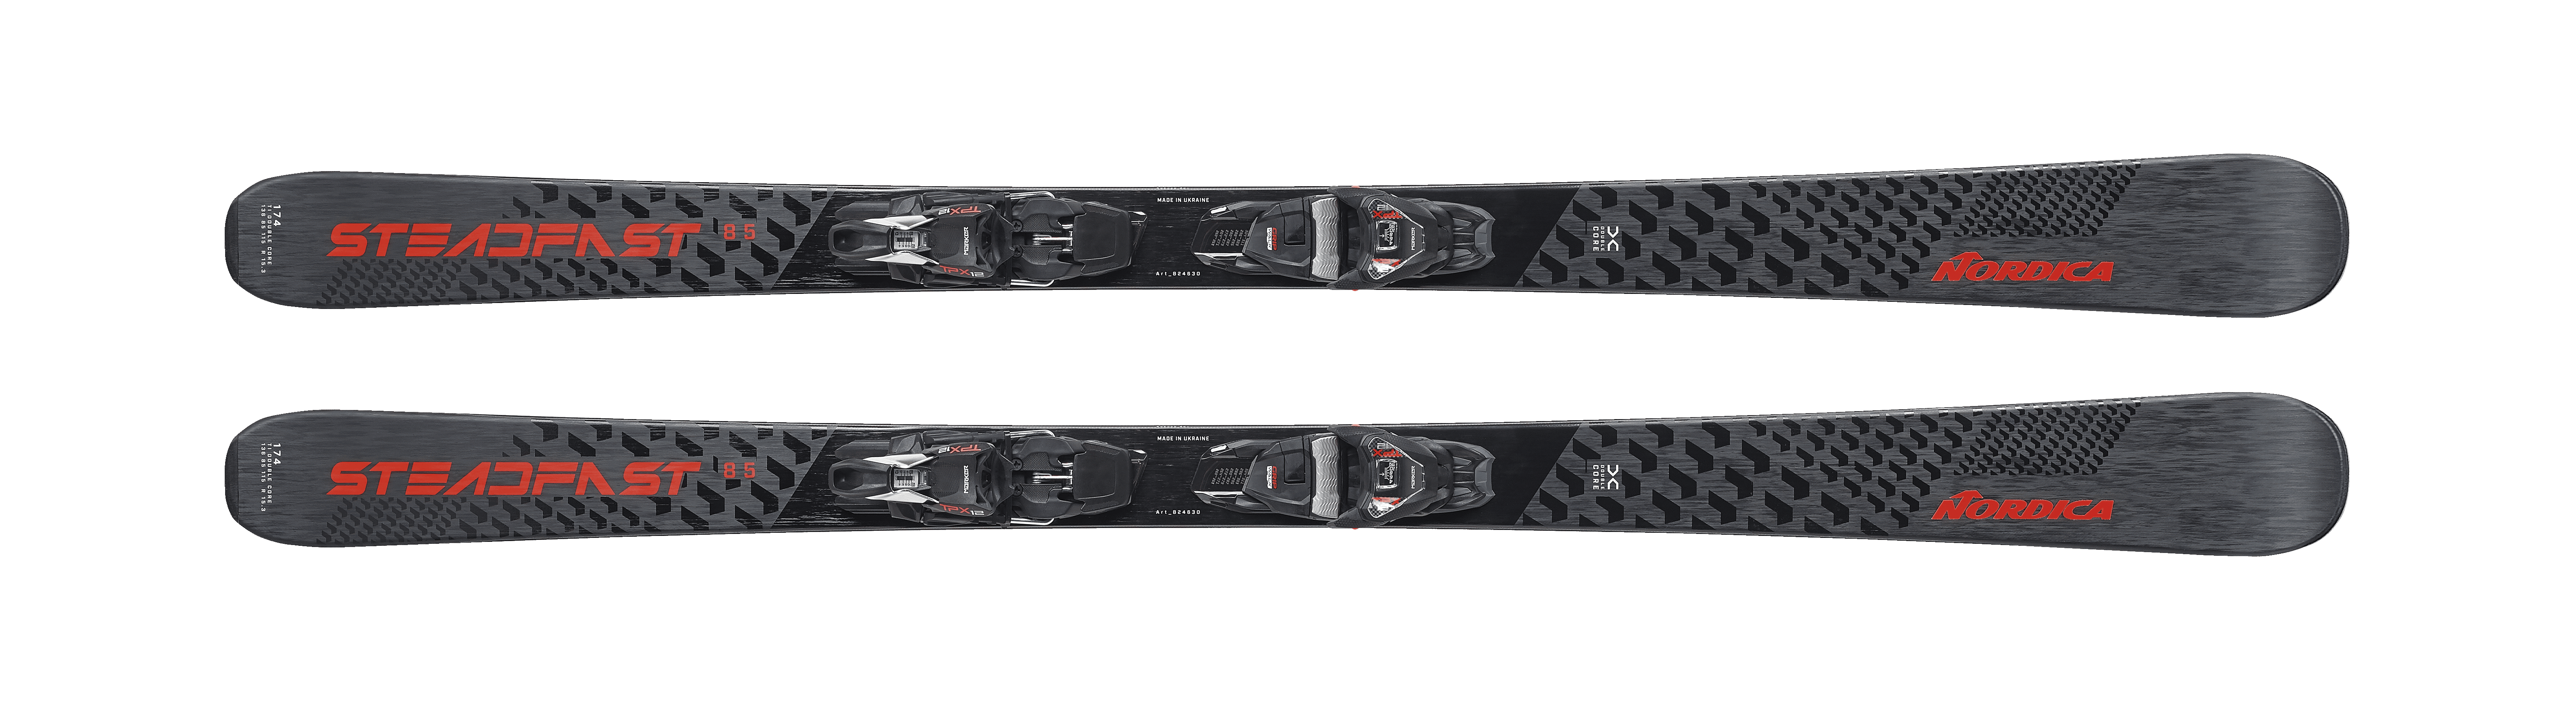 Sportmachine 3 100 (GW) - Nordica - Skis and Boots – Official website